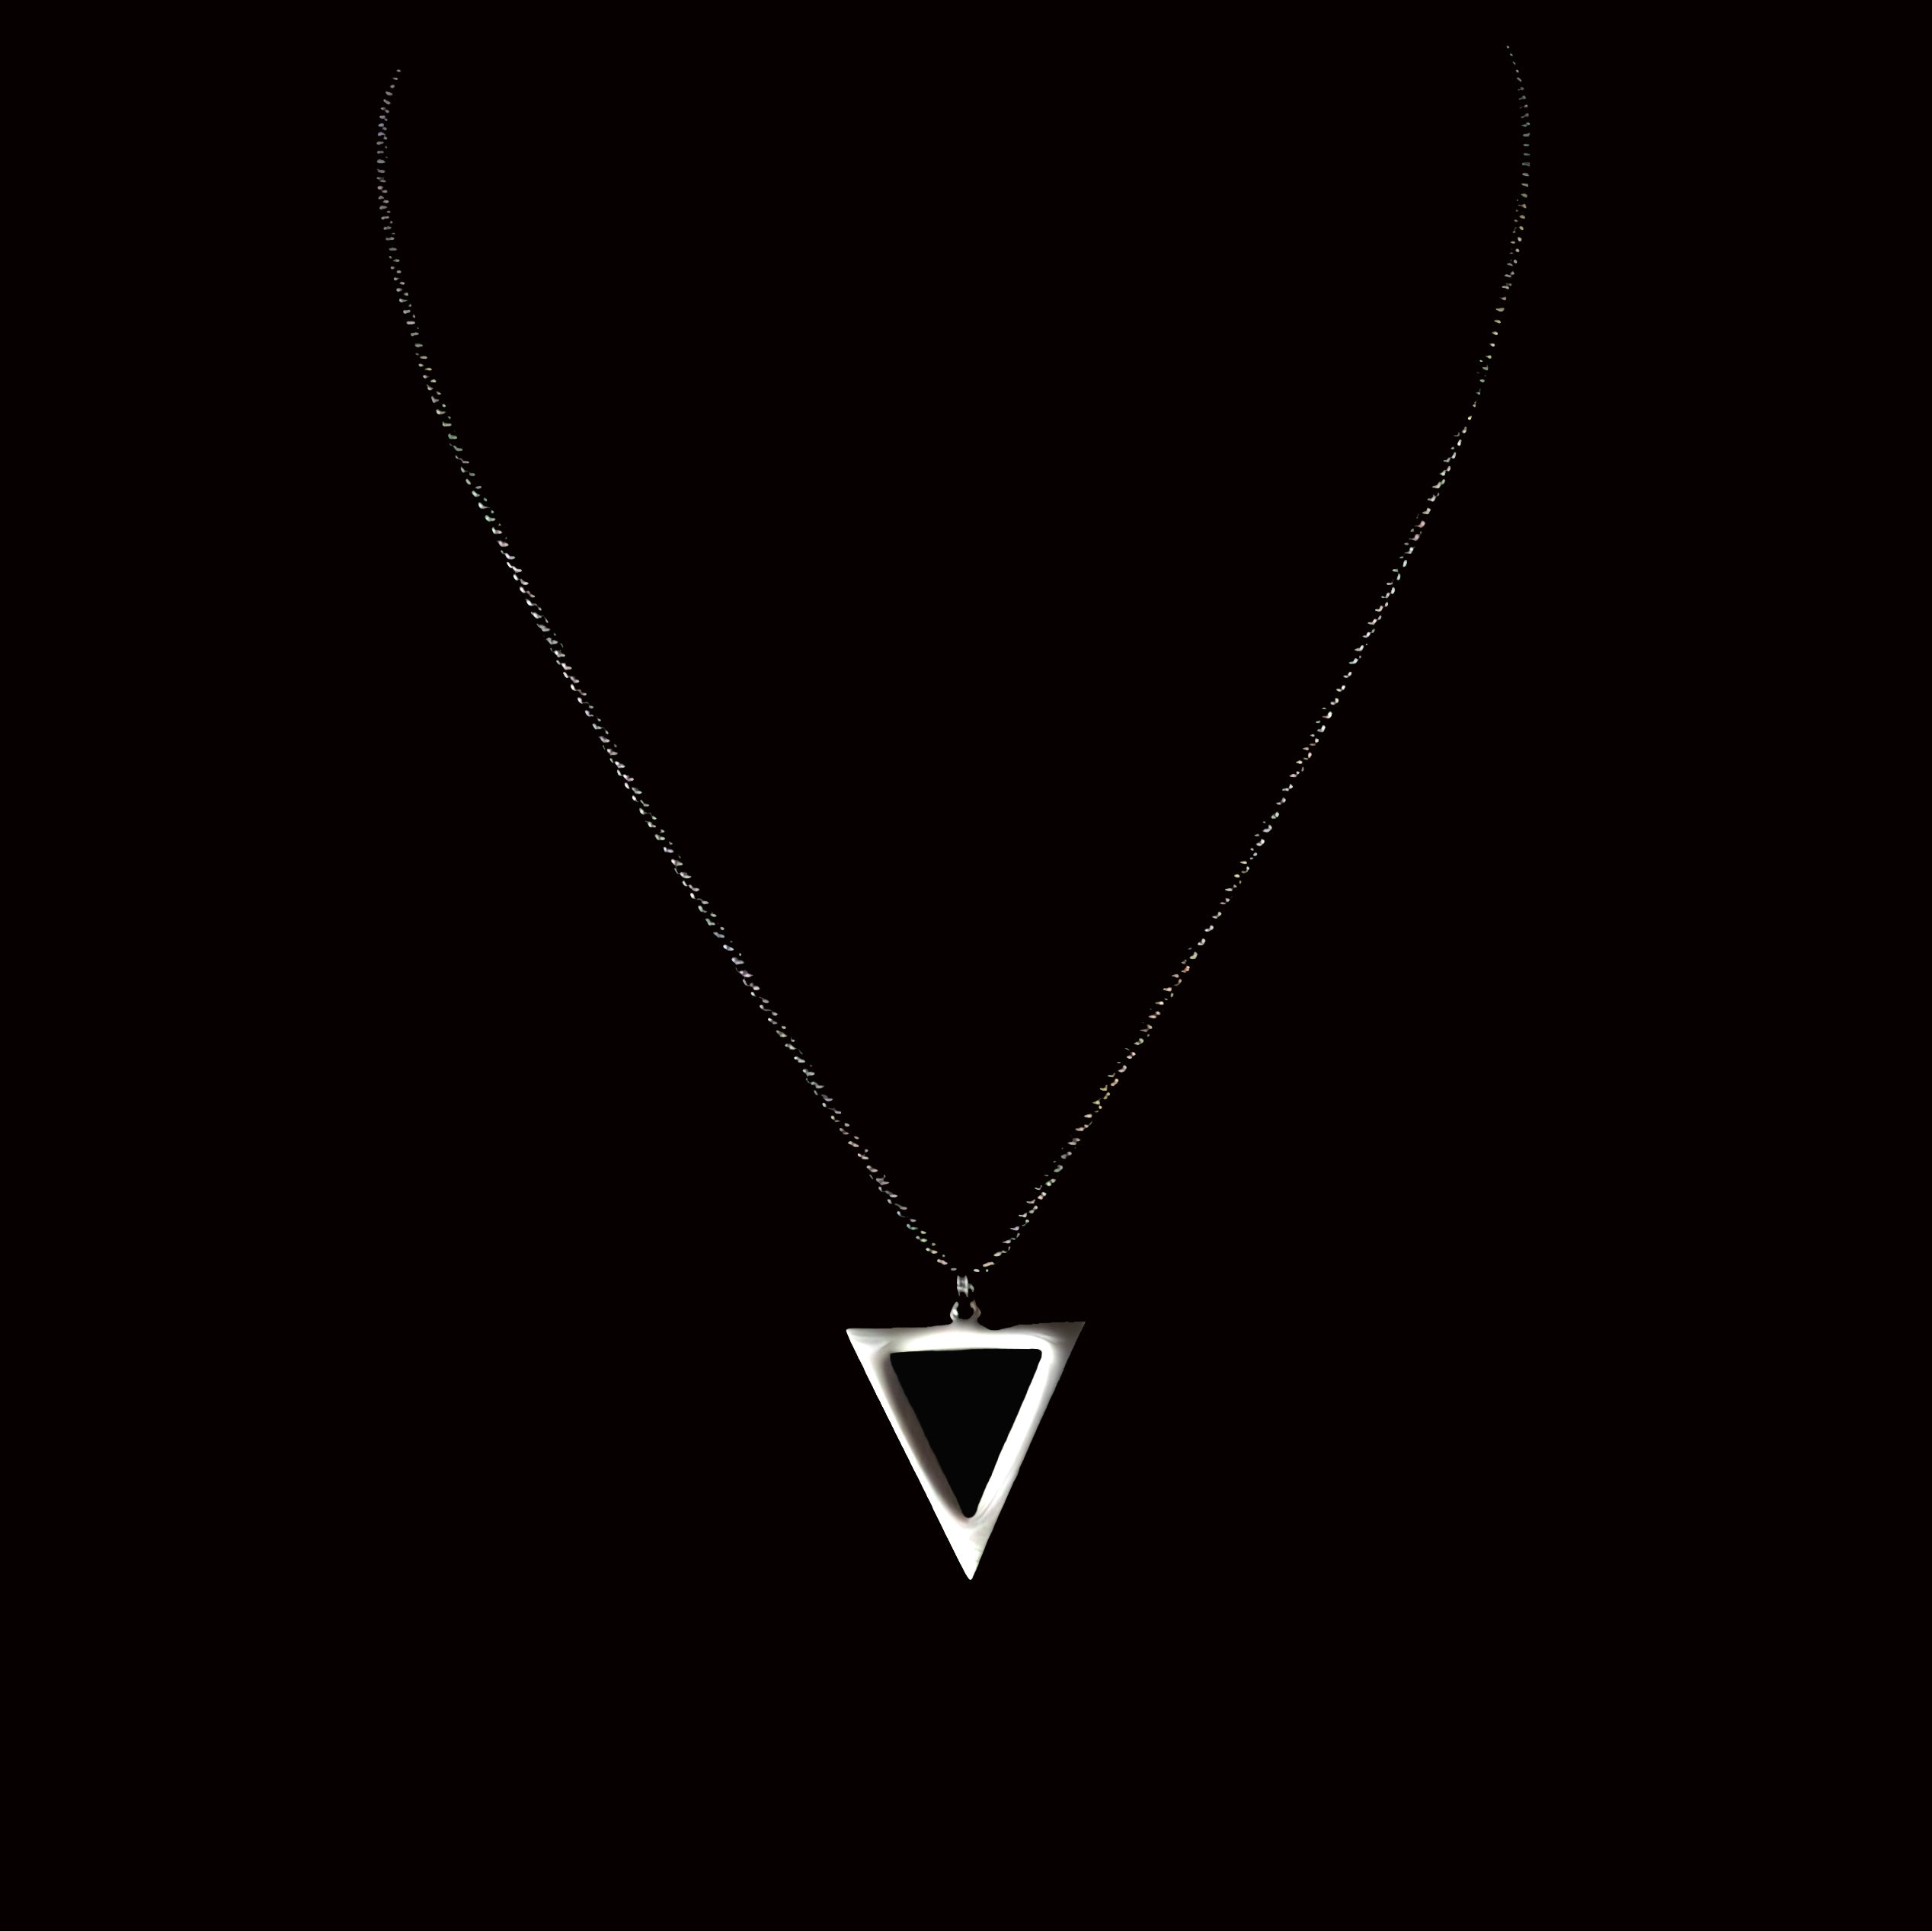 BERML BY DESIGN JEWELRY FOR MEN